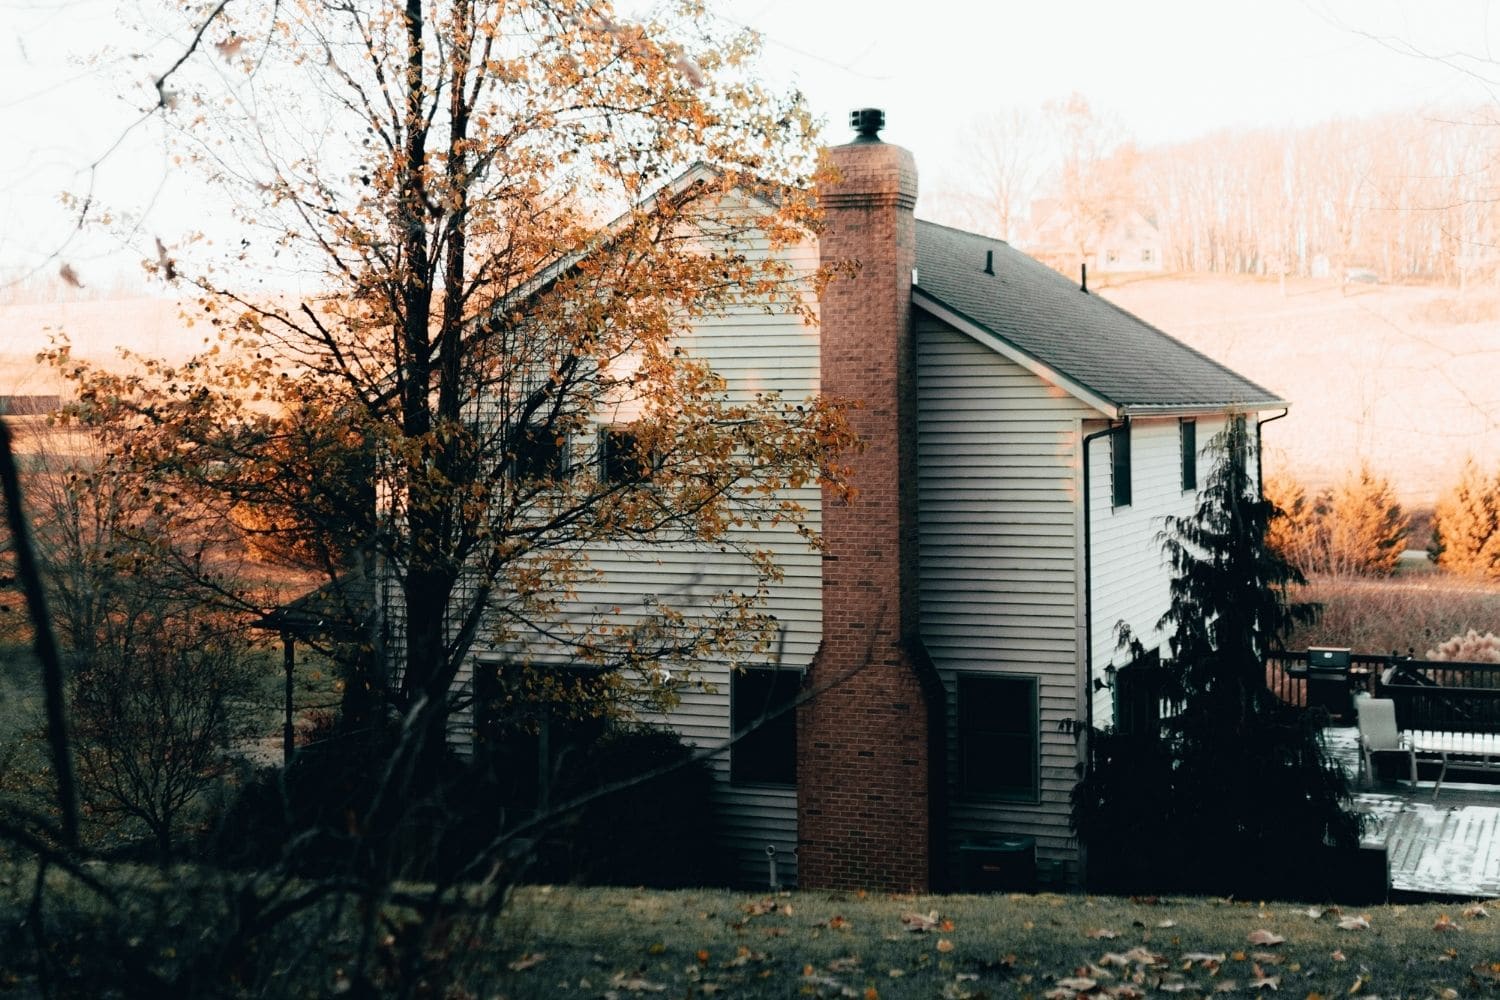 A house with fall colors is owned by homeowners who are considering if they should refinance their home.